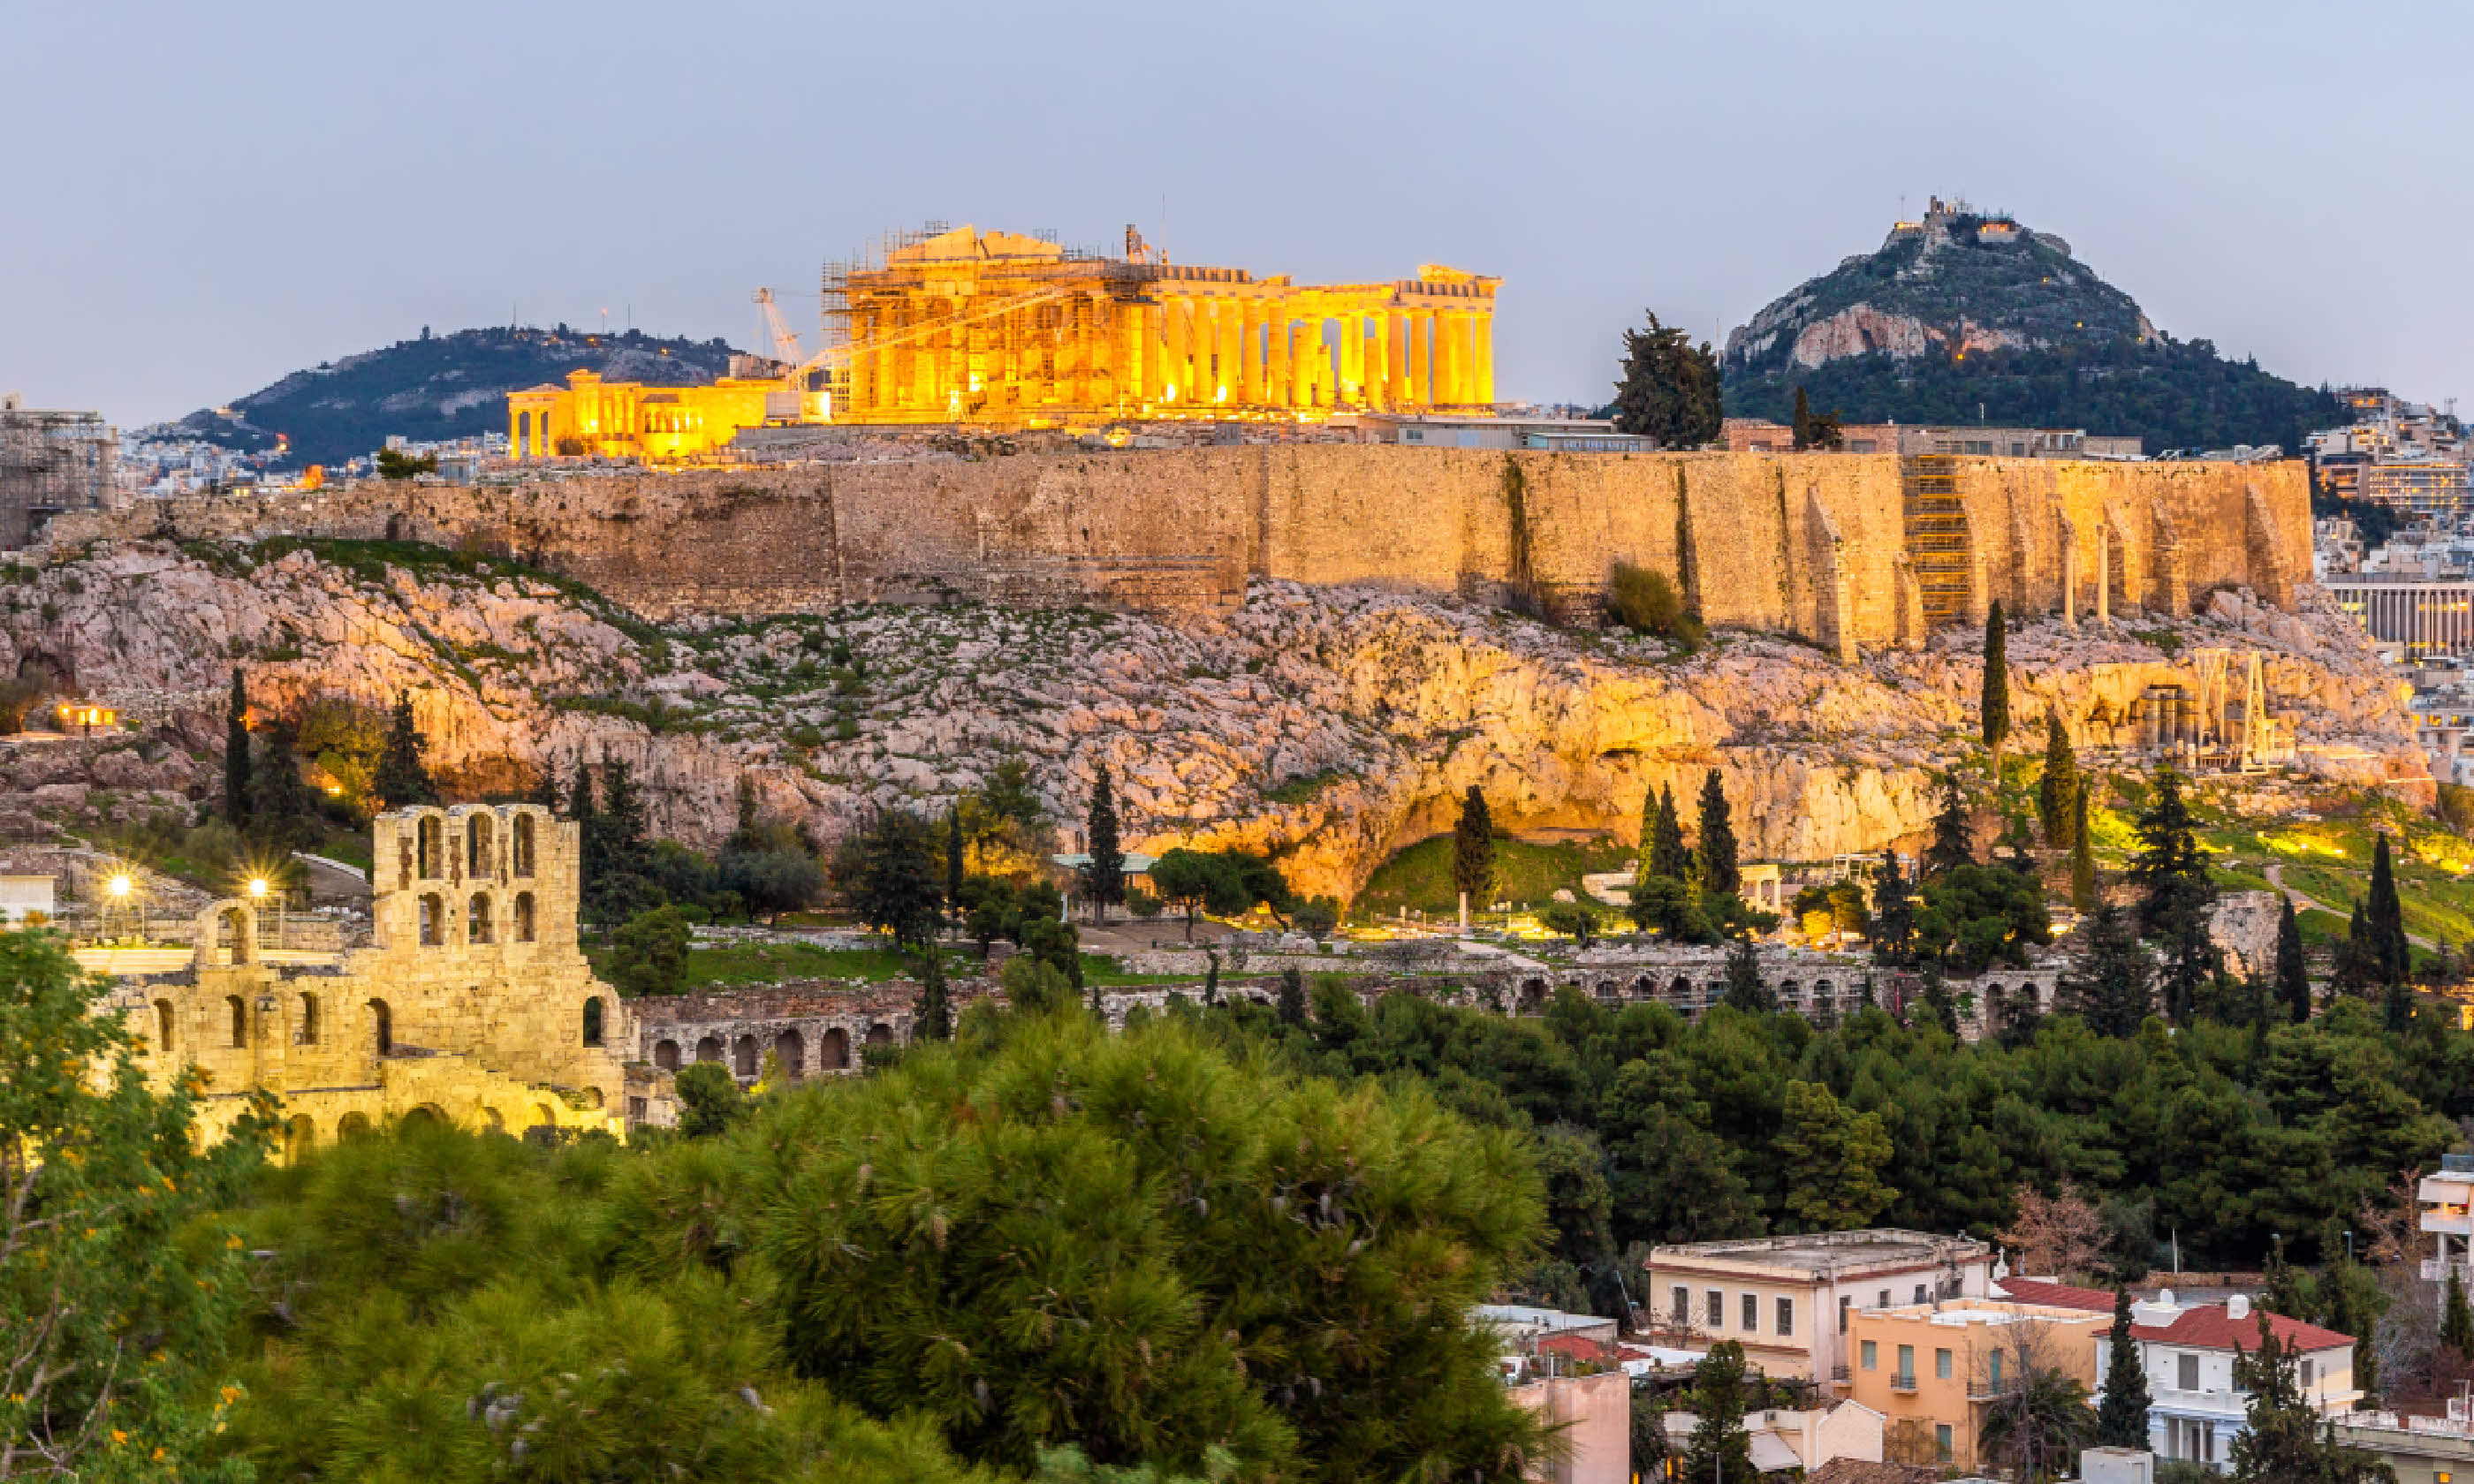 Acropolis of Athens (Shutterstock)